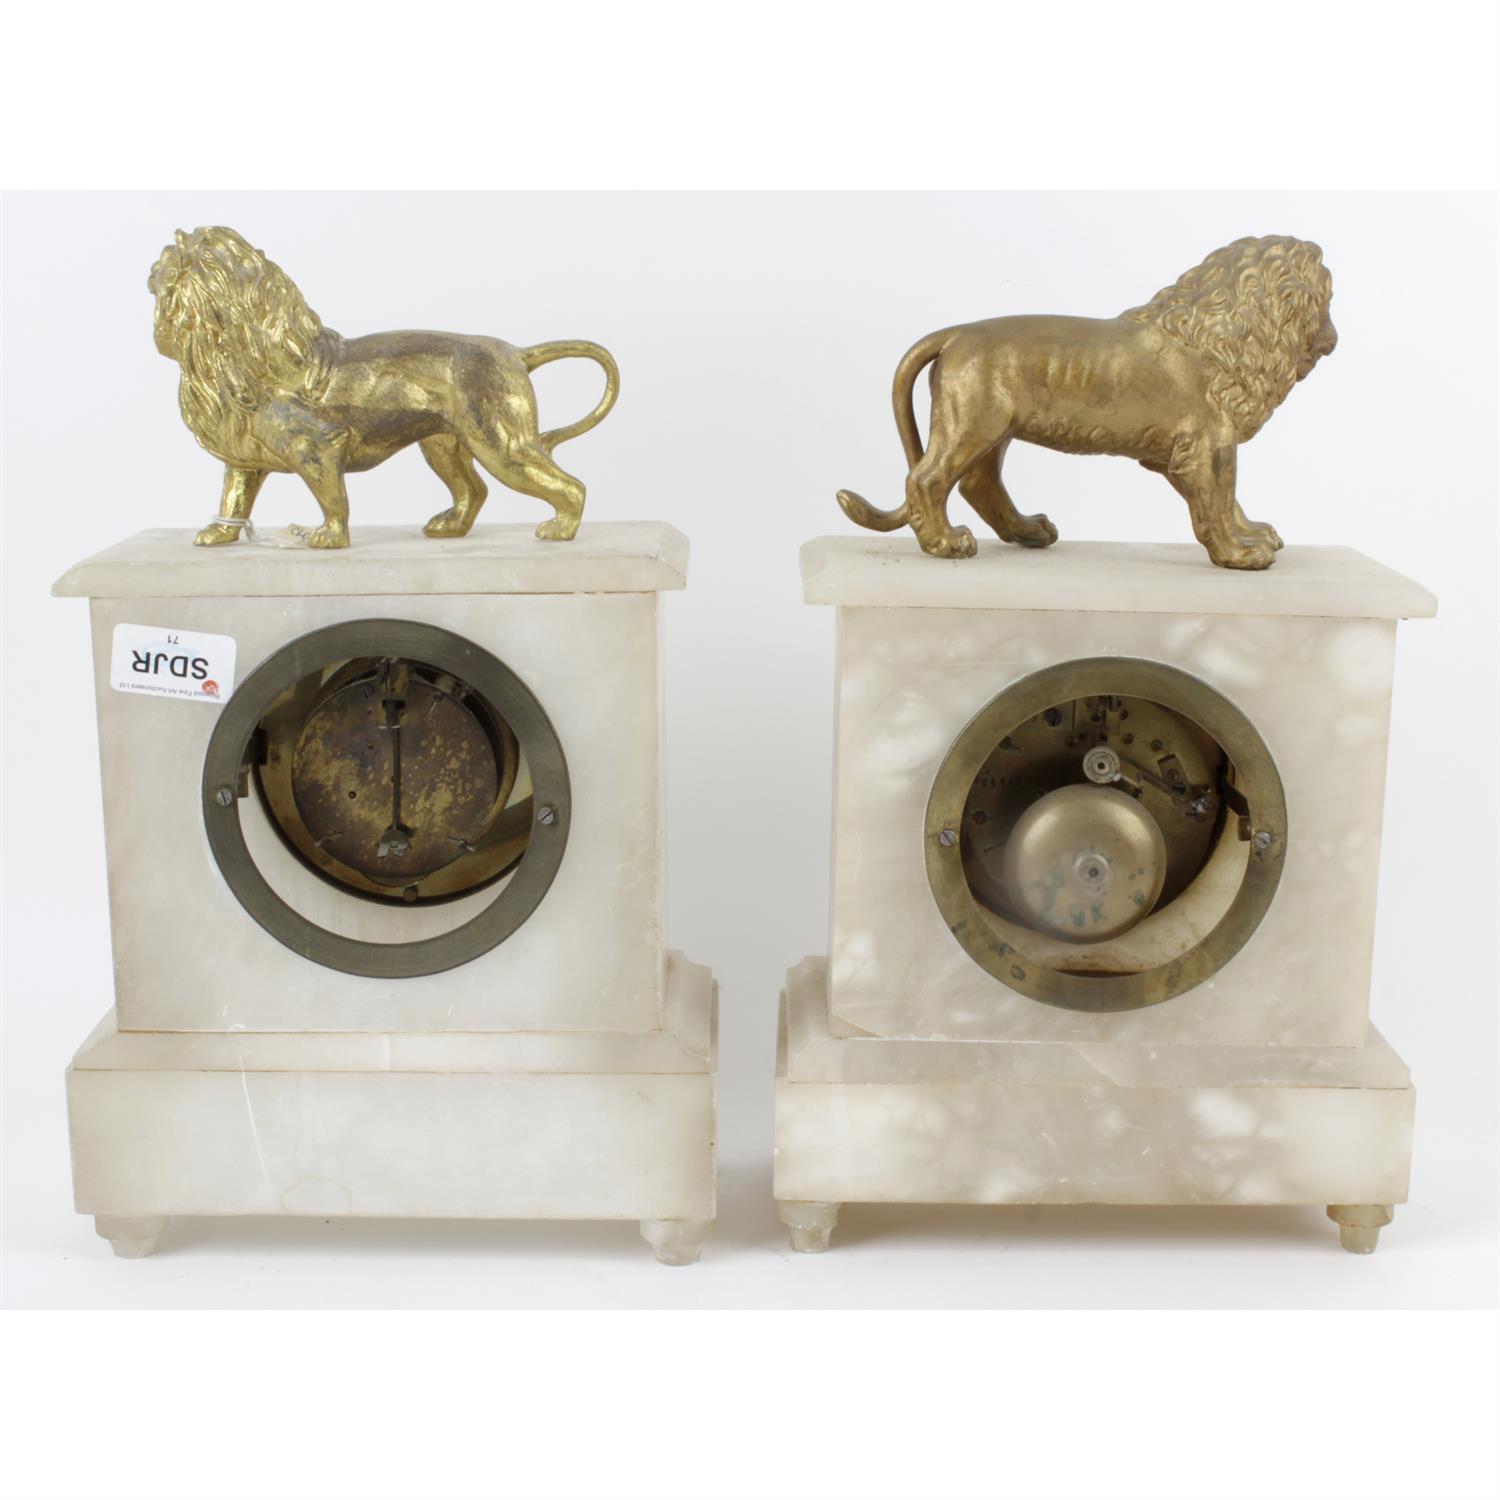 Two 20th century mantel clocks with gilt lion finials - Image 4 of 4